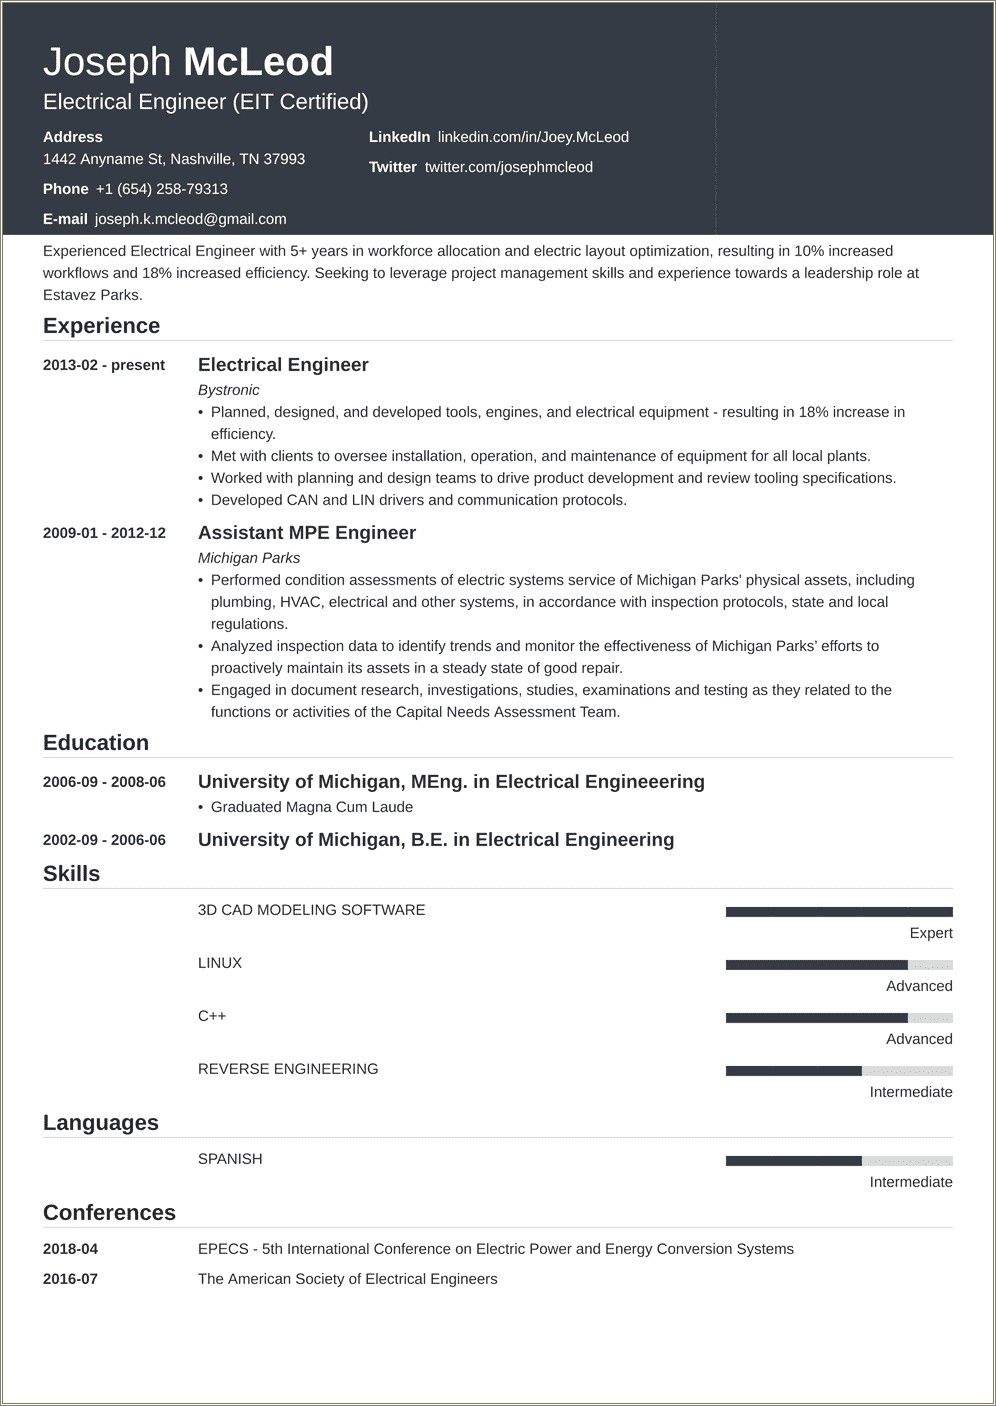 Resume Objective Examples For Electrical Engineer